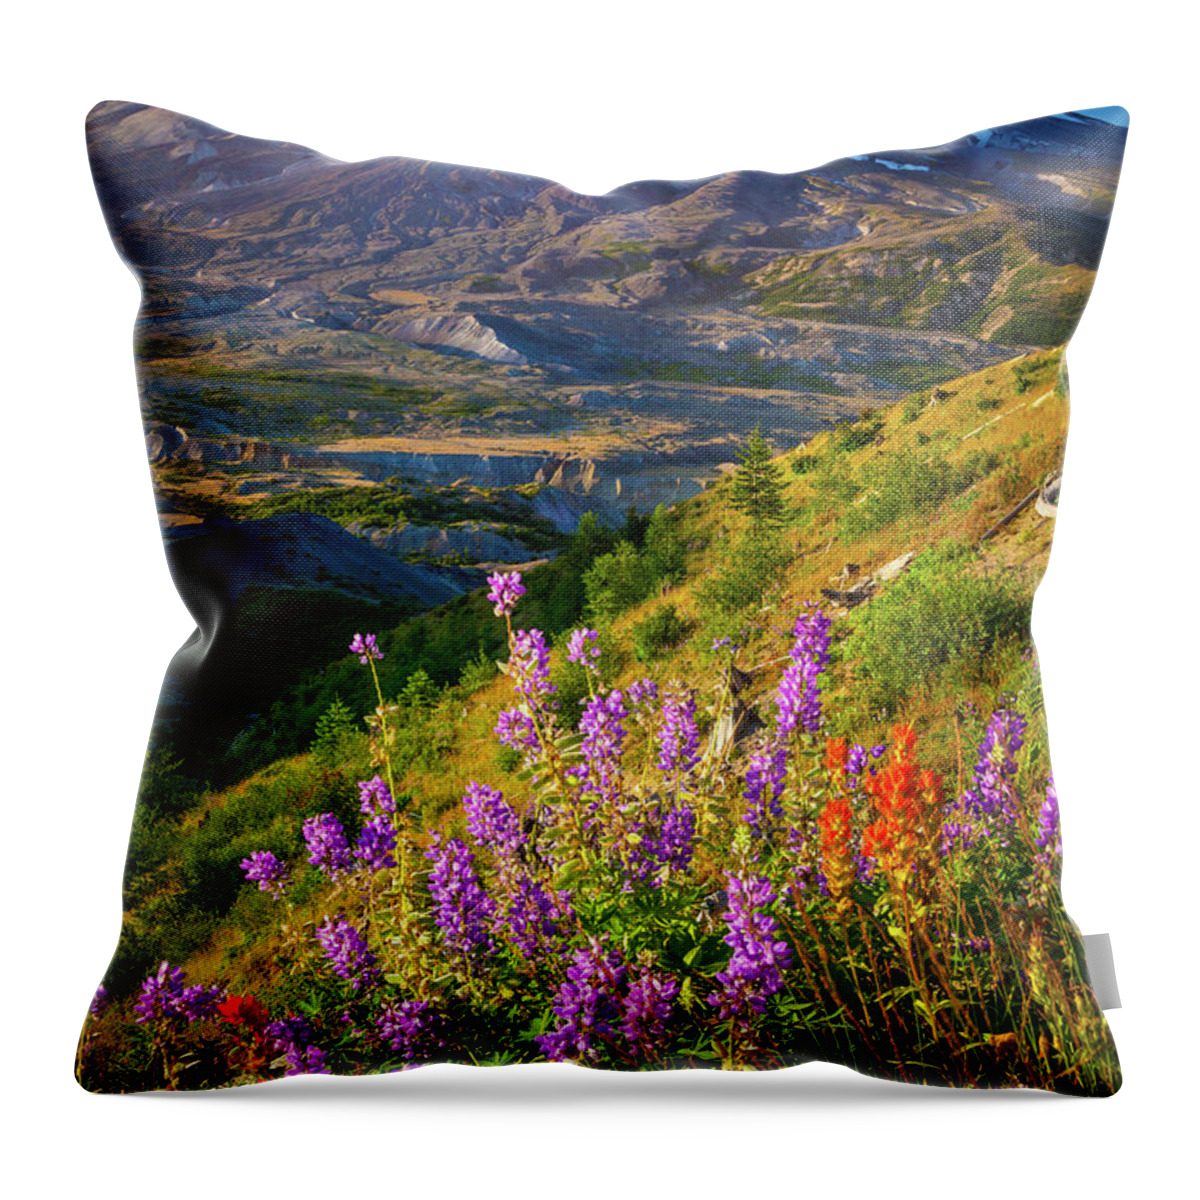 America Throw Pillow featuring the photograph Mount Saint Helens Caldera by Inge Johnsson